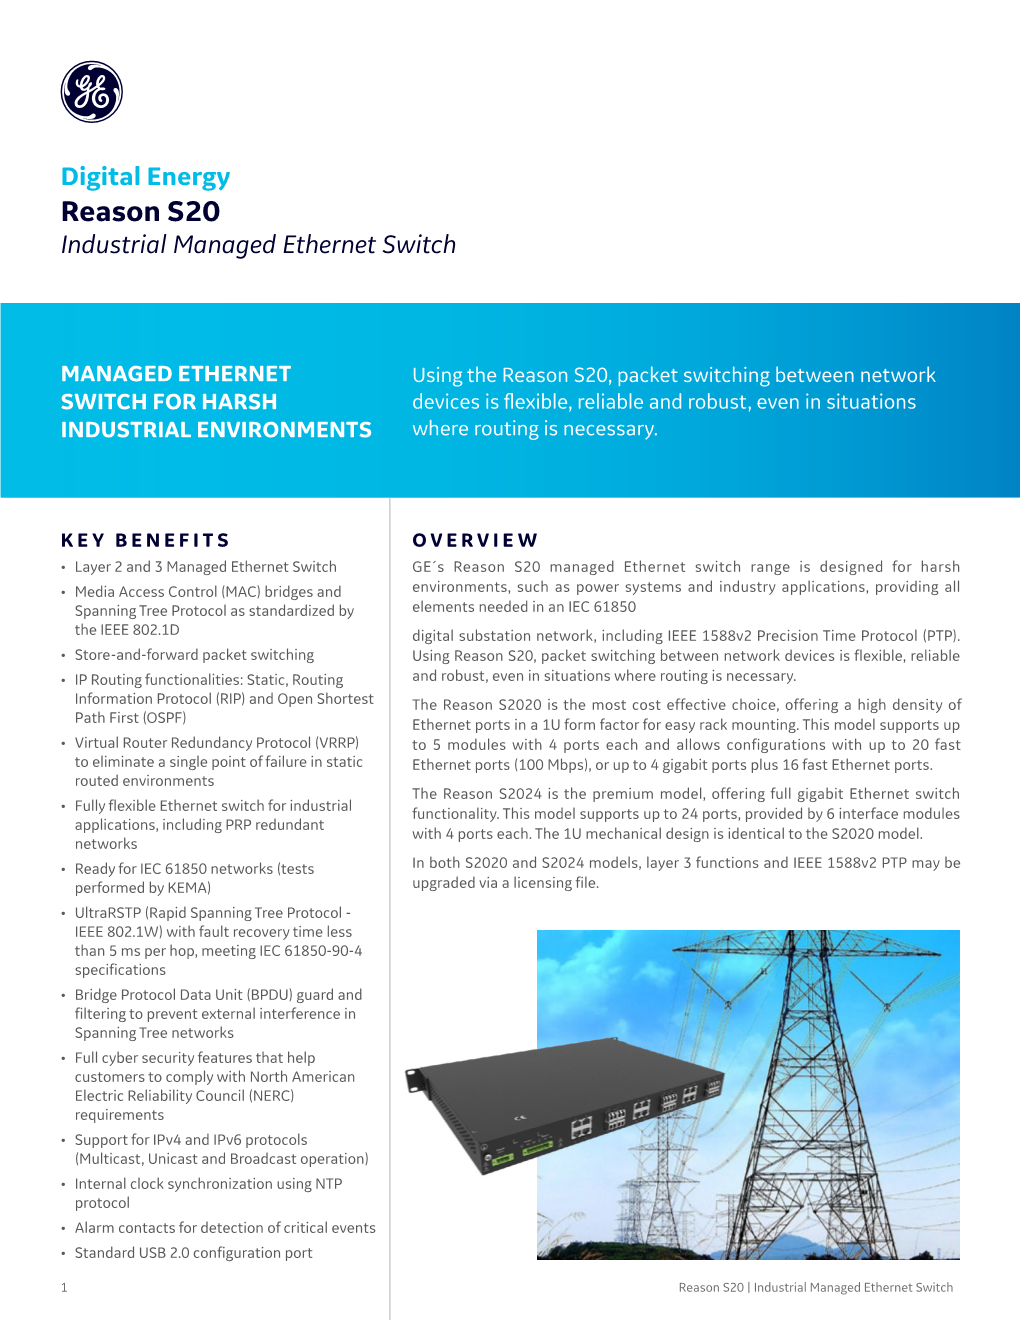 Digital Energy Reason S20 Industrial Managed Ethernet Switch